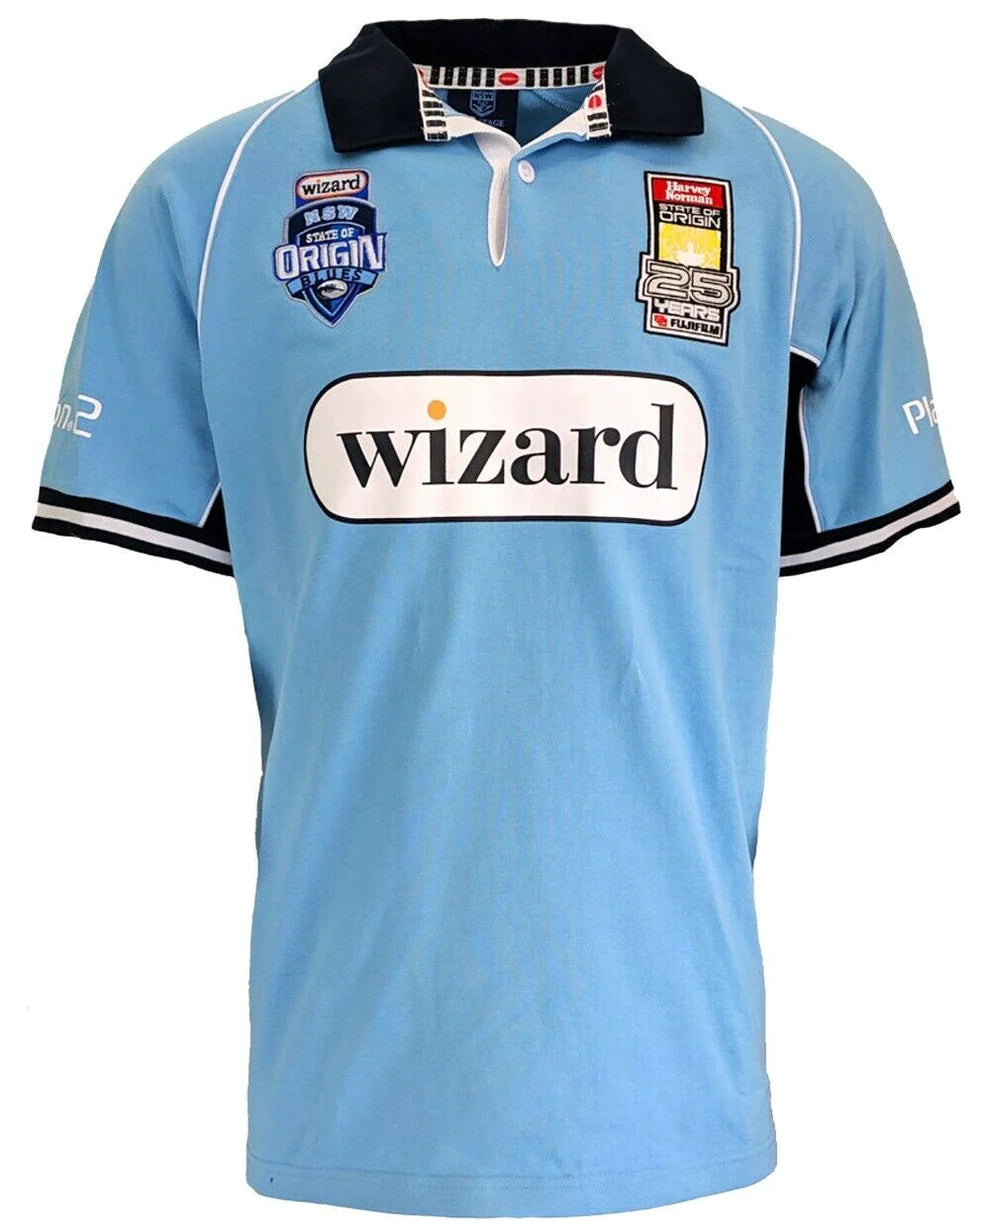 NSW Blues 2005 State of Origin NRL Vintage Retro Rugby Jersey